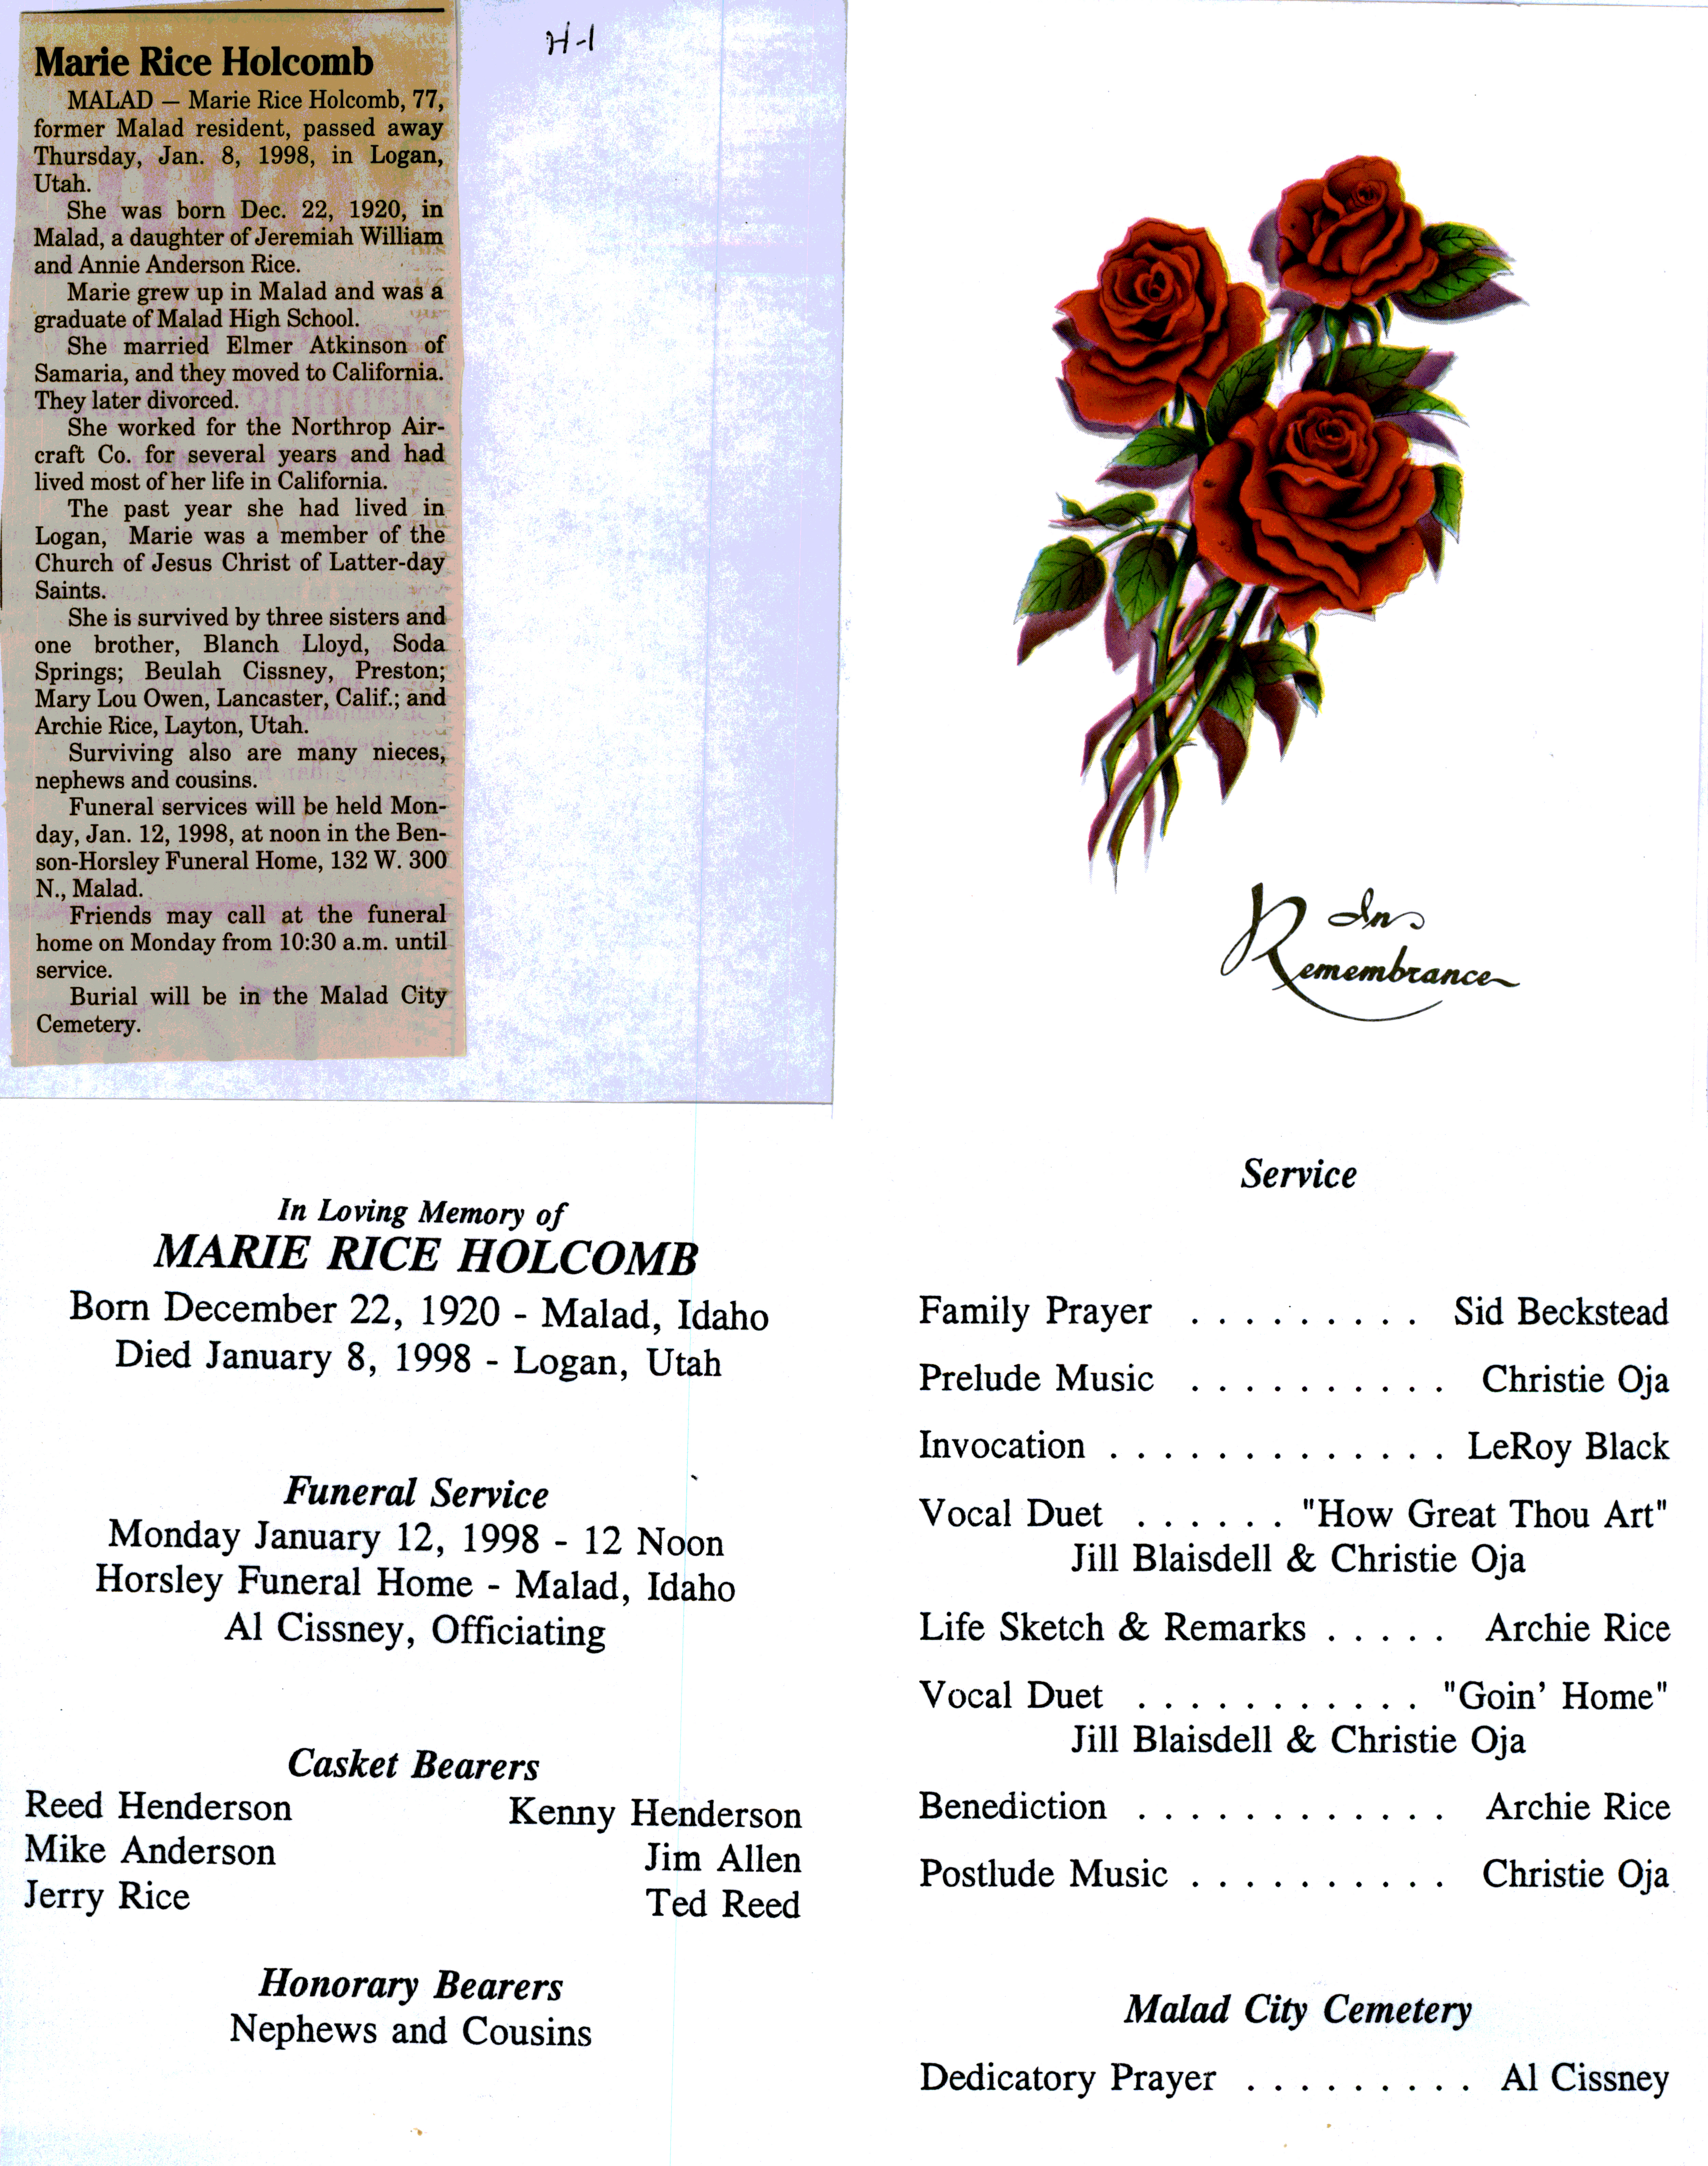 Marie Rice Holcomb obit and program